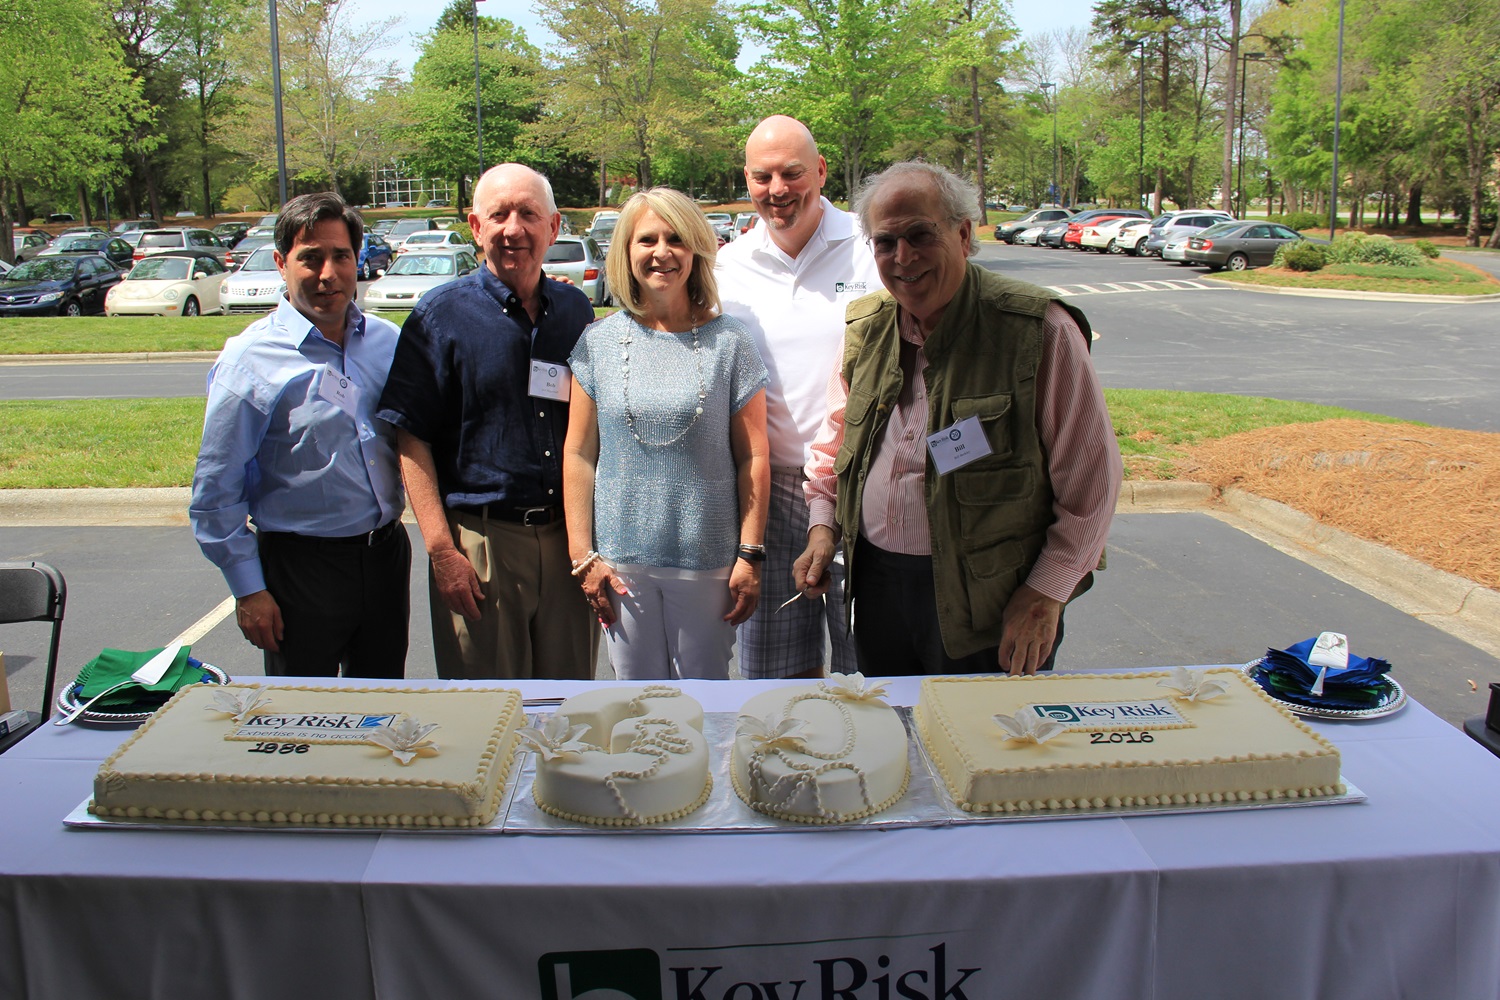 Key Risk members celebrate 30 Years of Great Workers Compensation Insurance Solutions